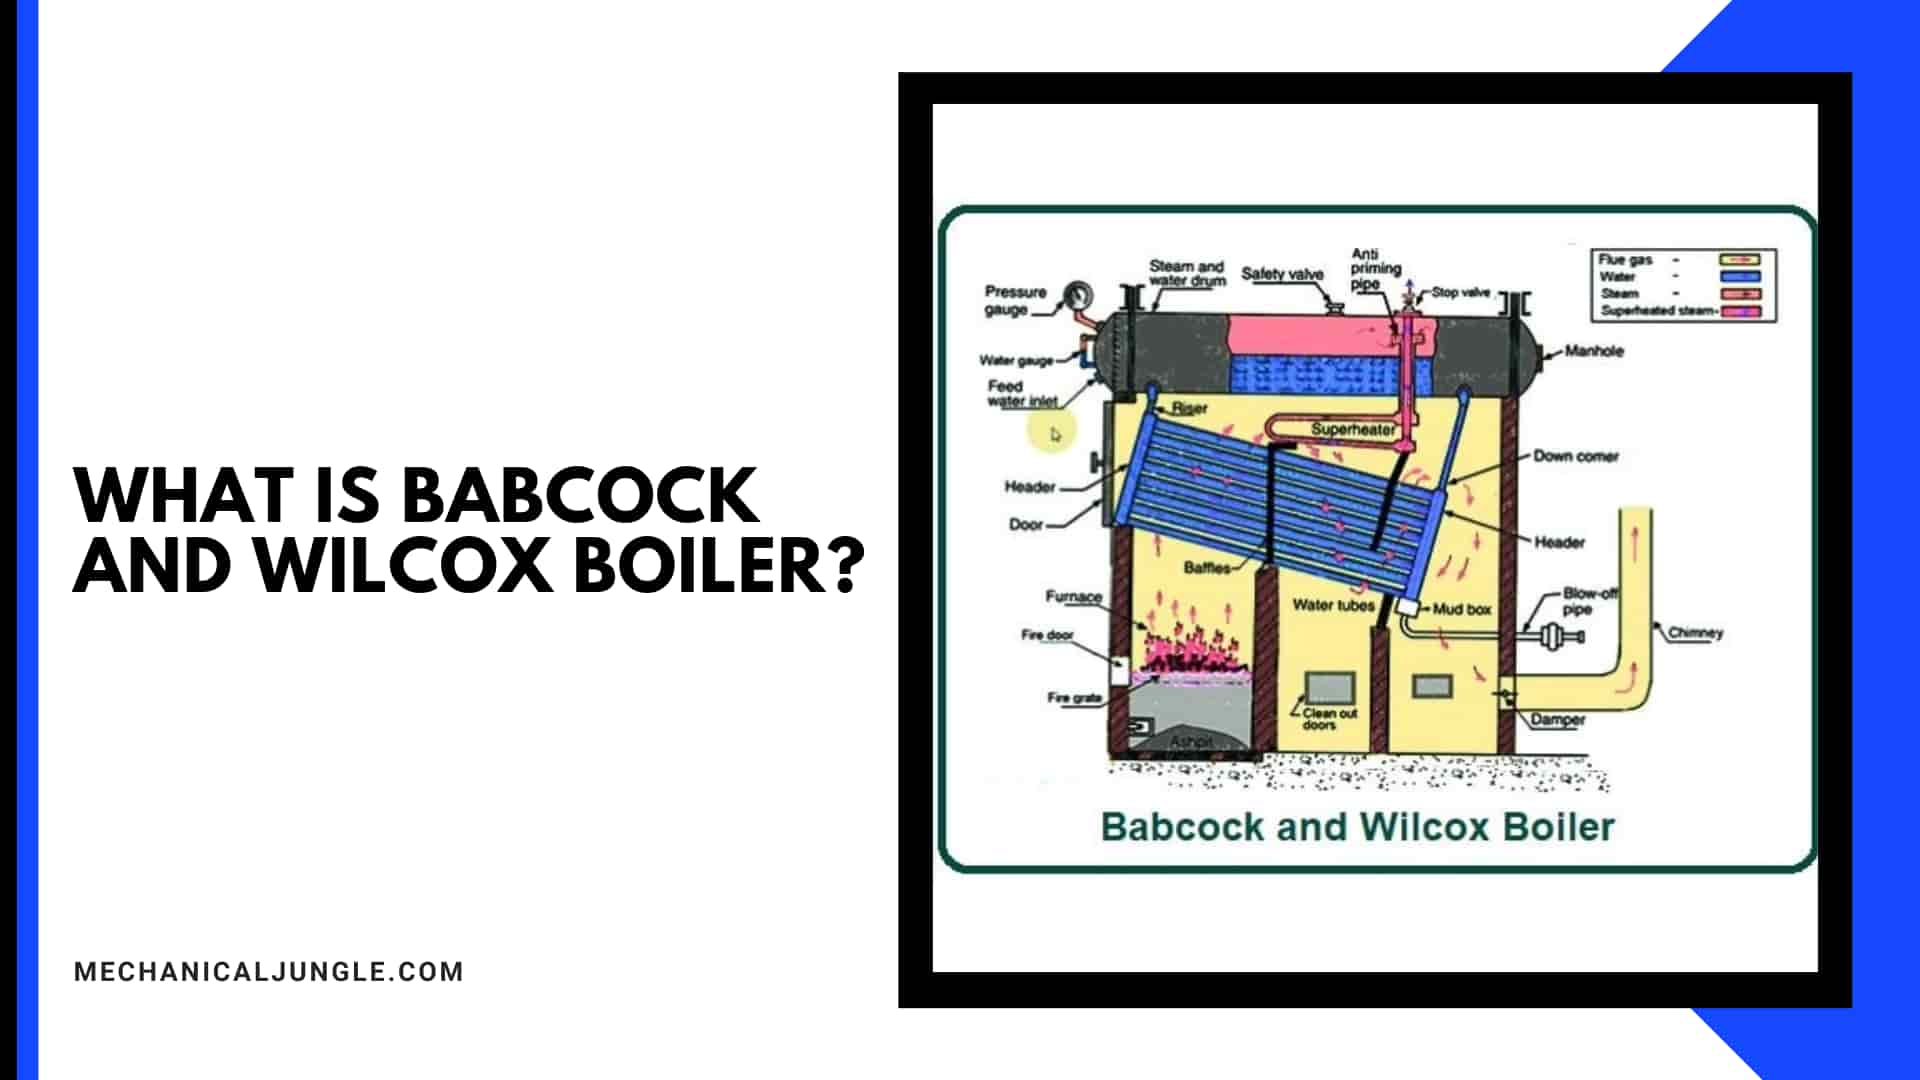 What Is Babcock and Wilcox Boiler?